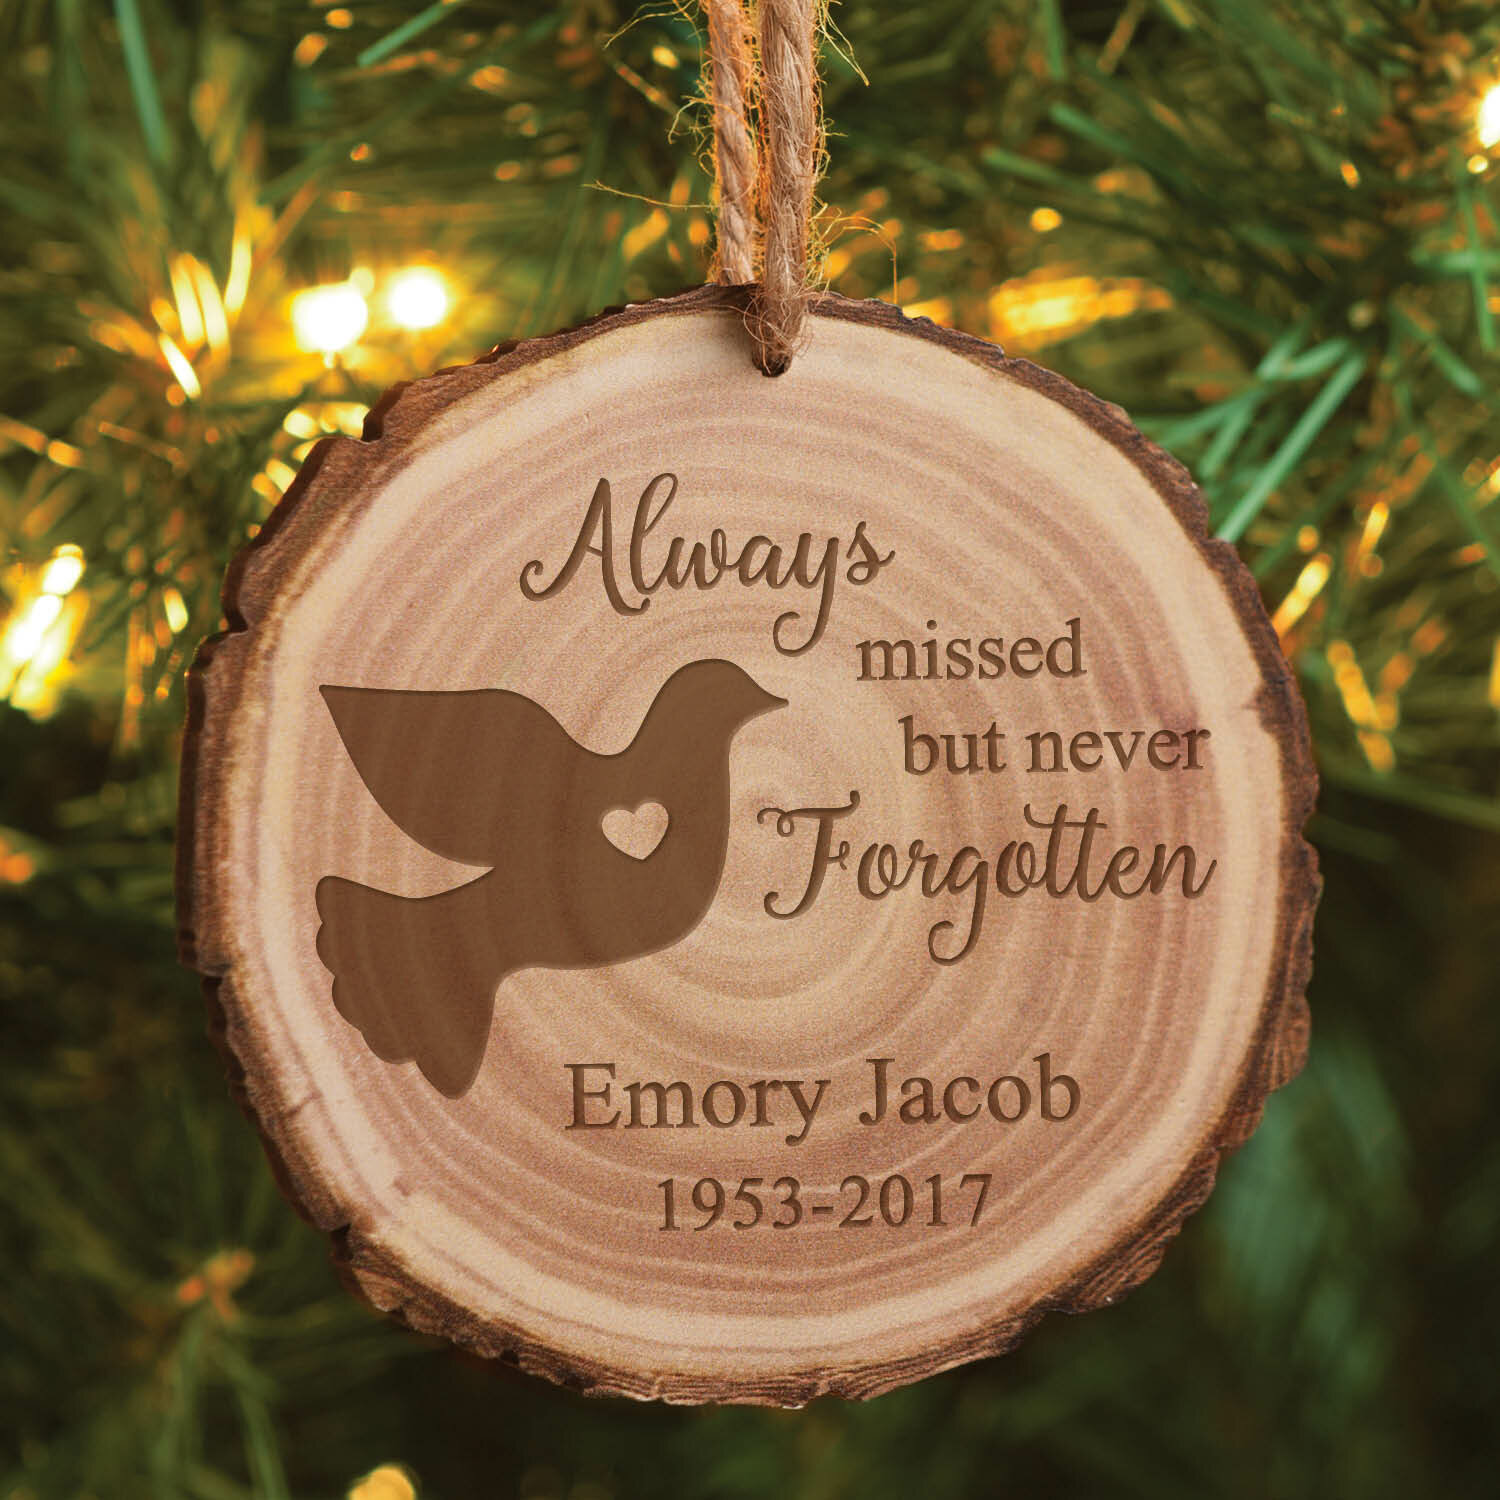 Mr. & Mrs. Heart Personalized Wood Holiday Shaped Ornament The Holiday Aisle Customize: Yes